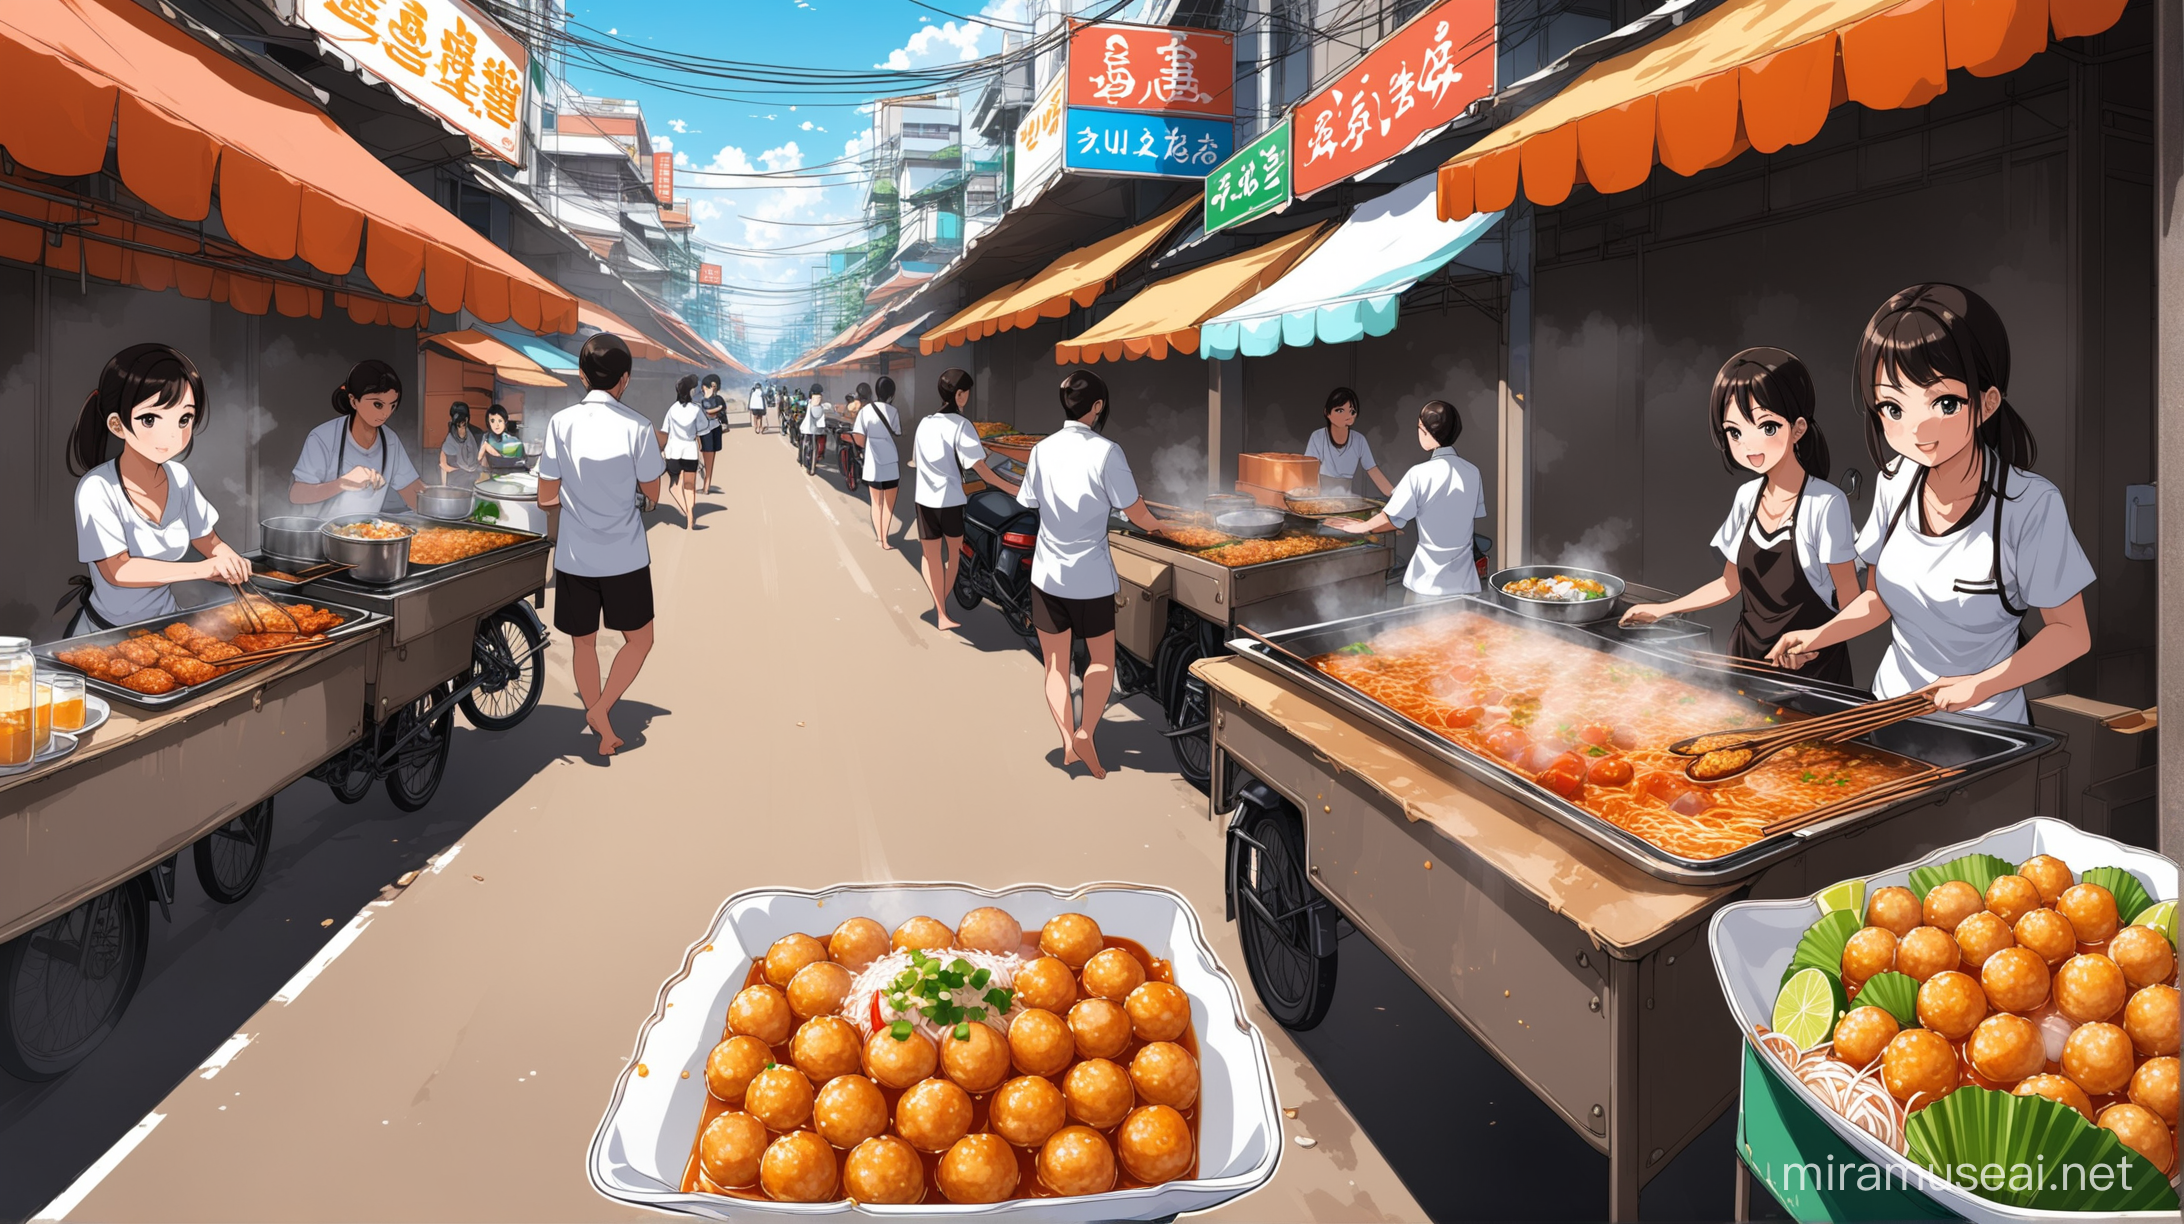 thailand street food anime perspective
